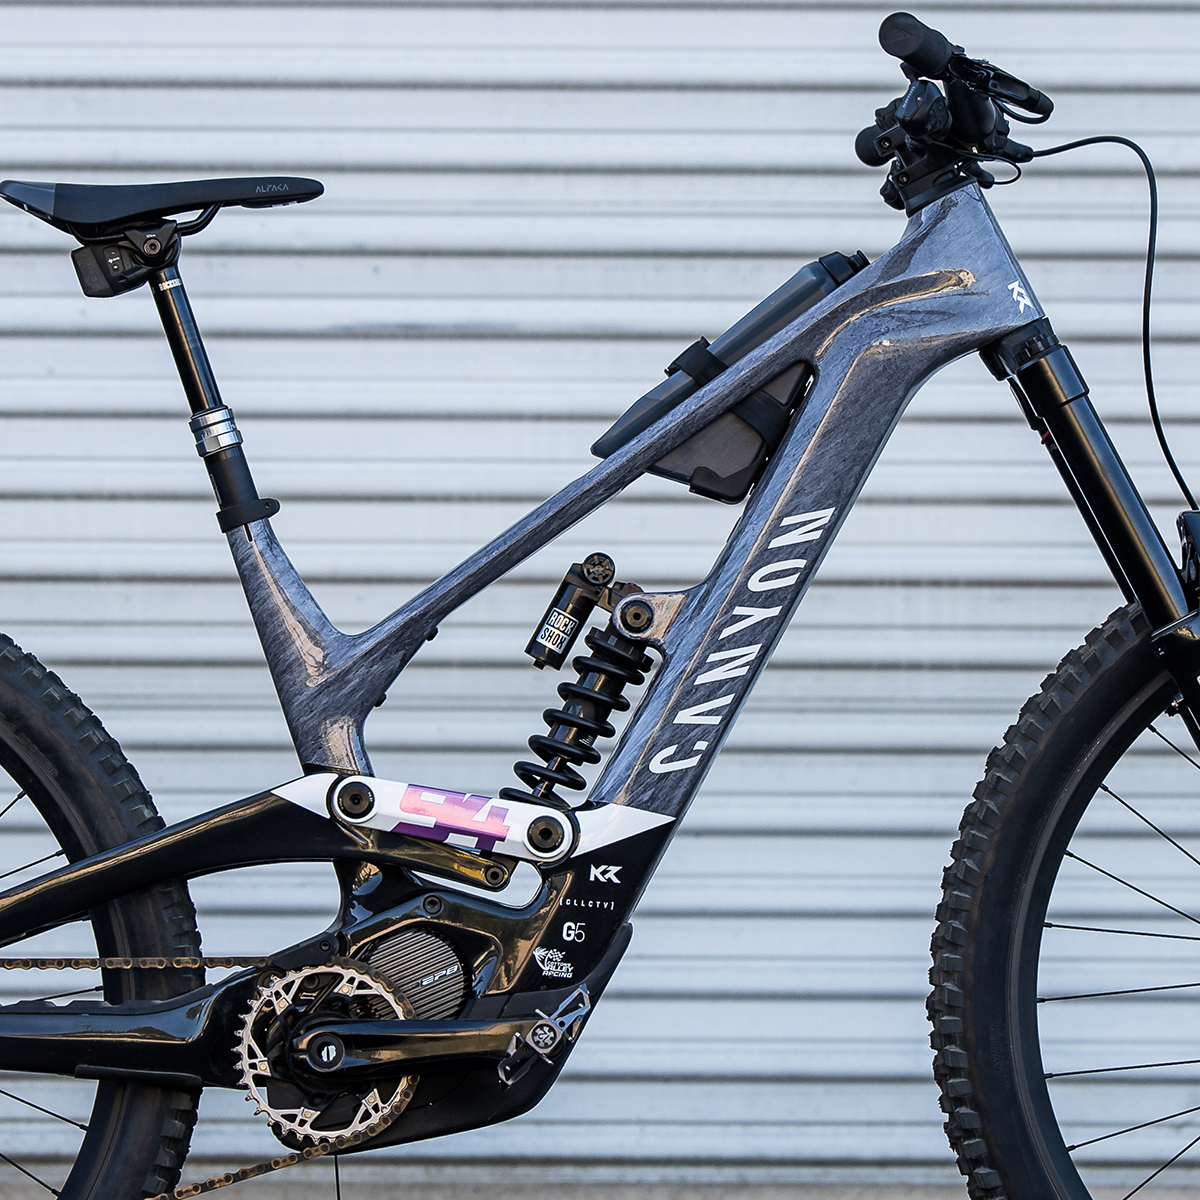 Canyon Torque:ON CF now gets the Shimano EP801 motor.